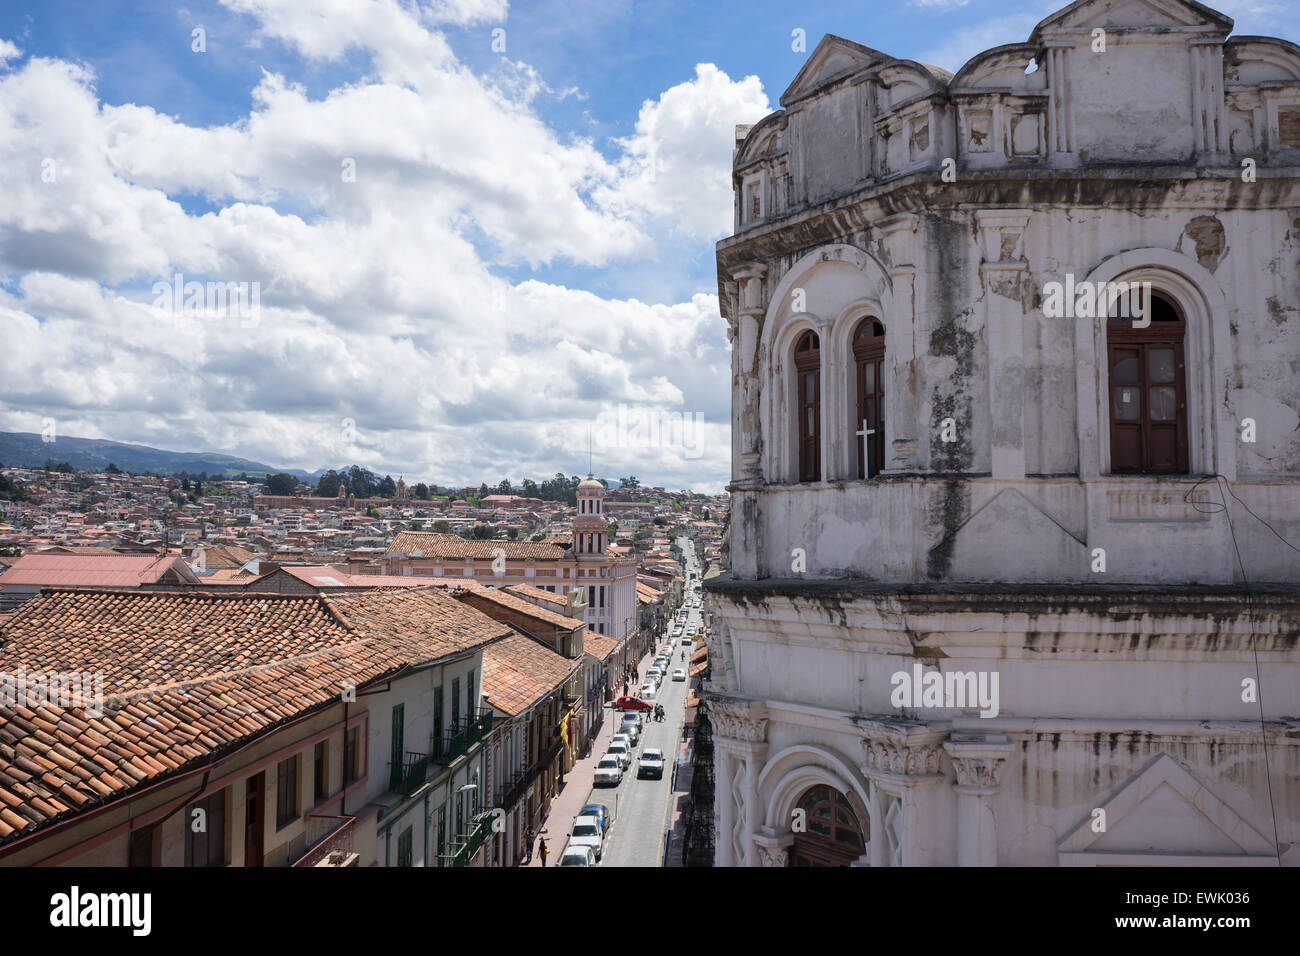 View of street and white colonial building in Cuenca, Ecuador with a cross in the antique window. Stock Photo